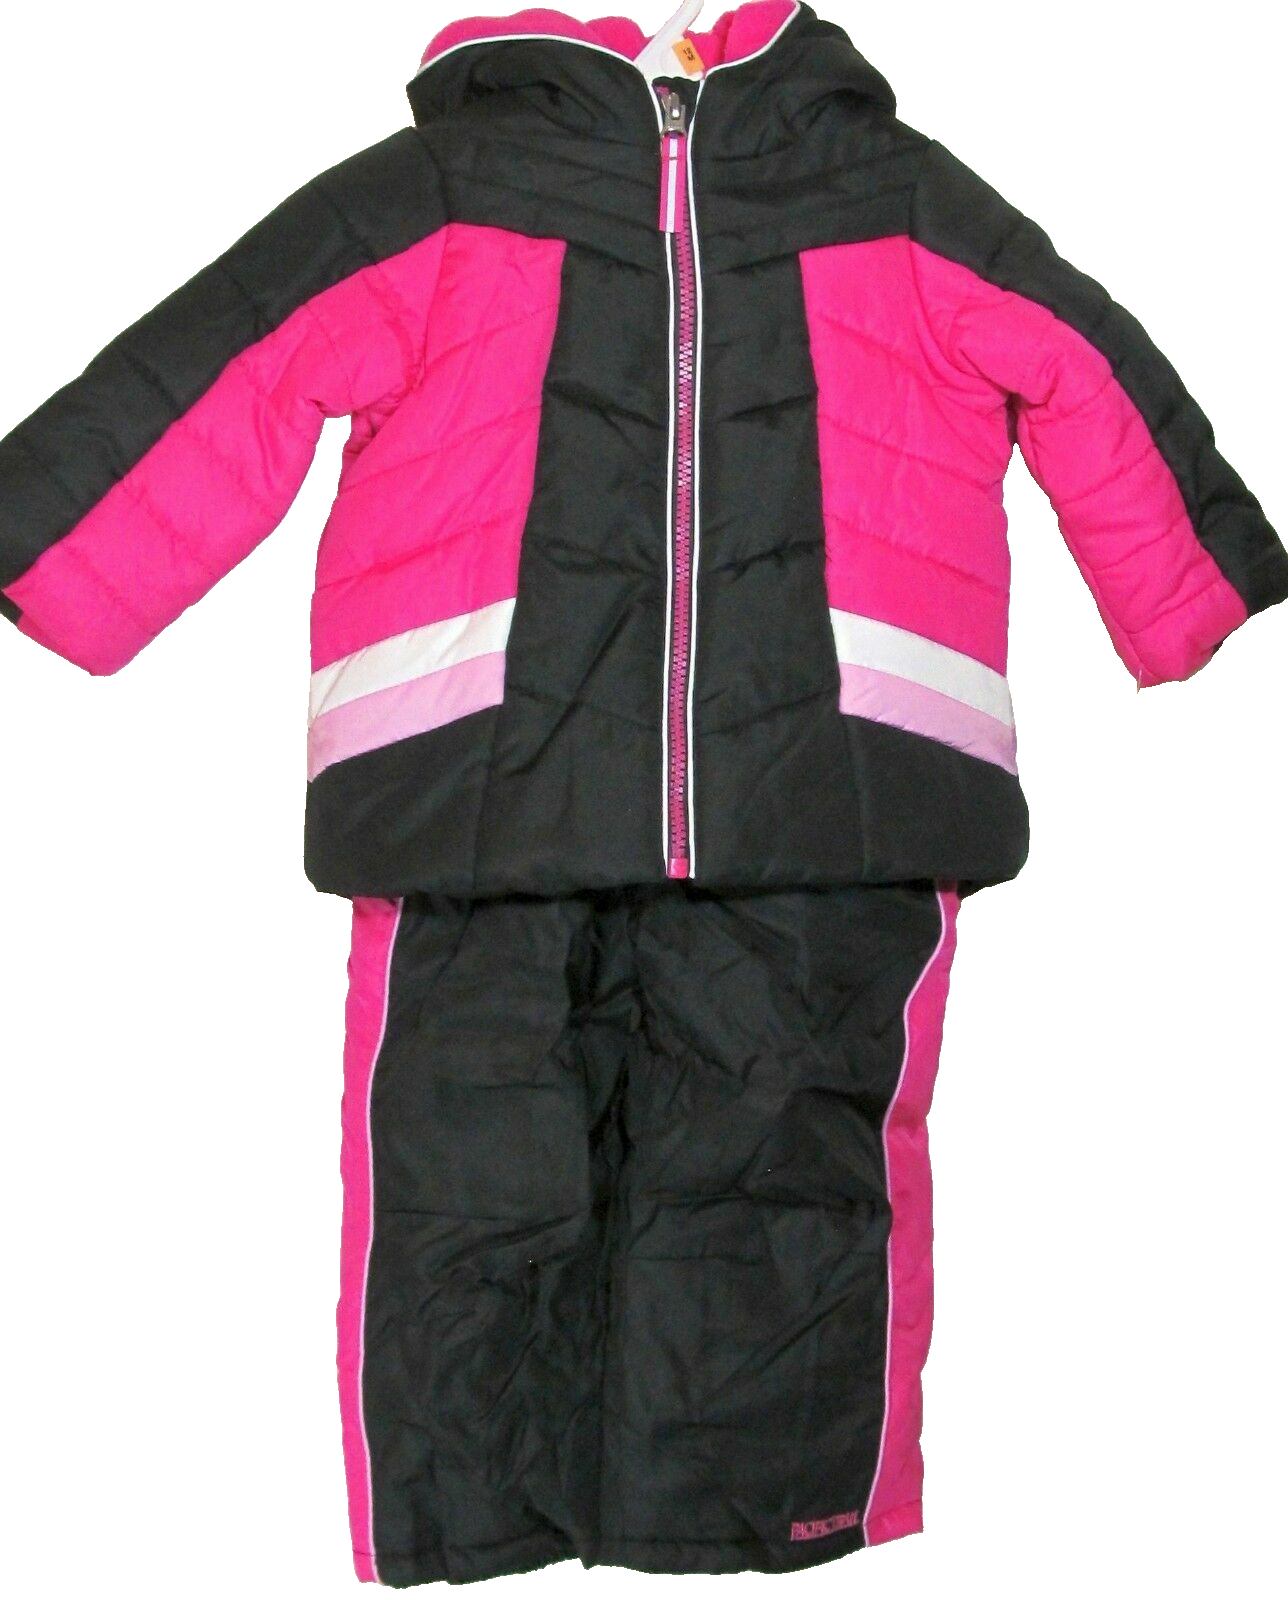 Primary image for Pacific Trail Girls 2 pc Snowsuit Bibs Pants and Jacket Coat 12 Months New